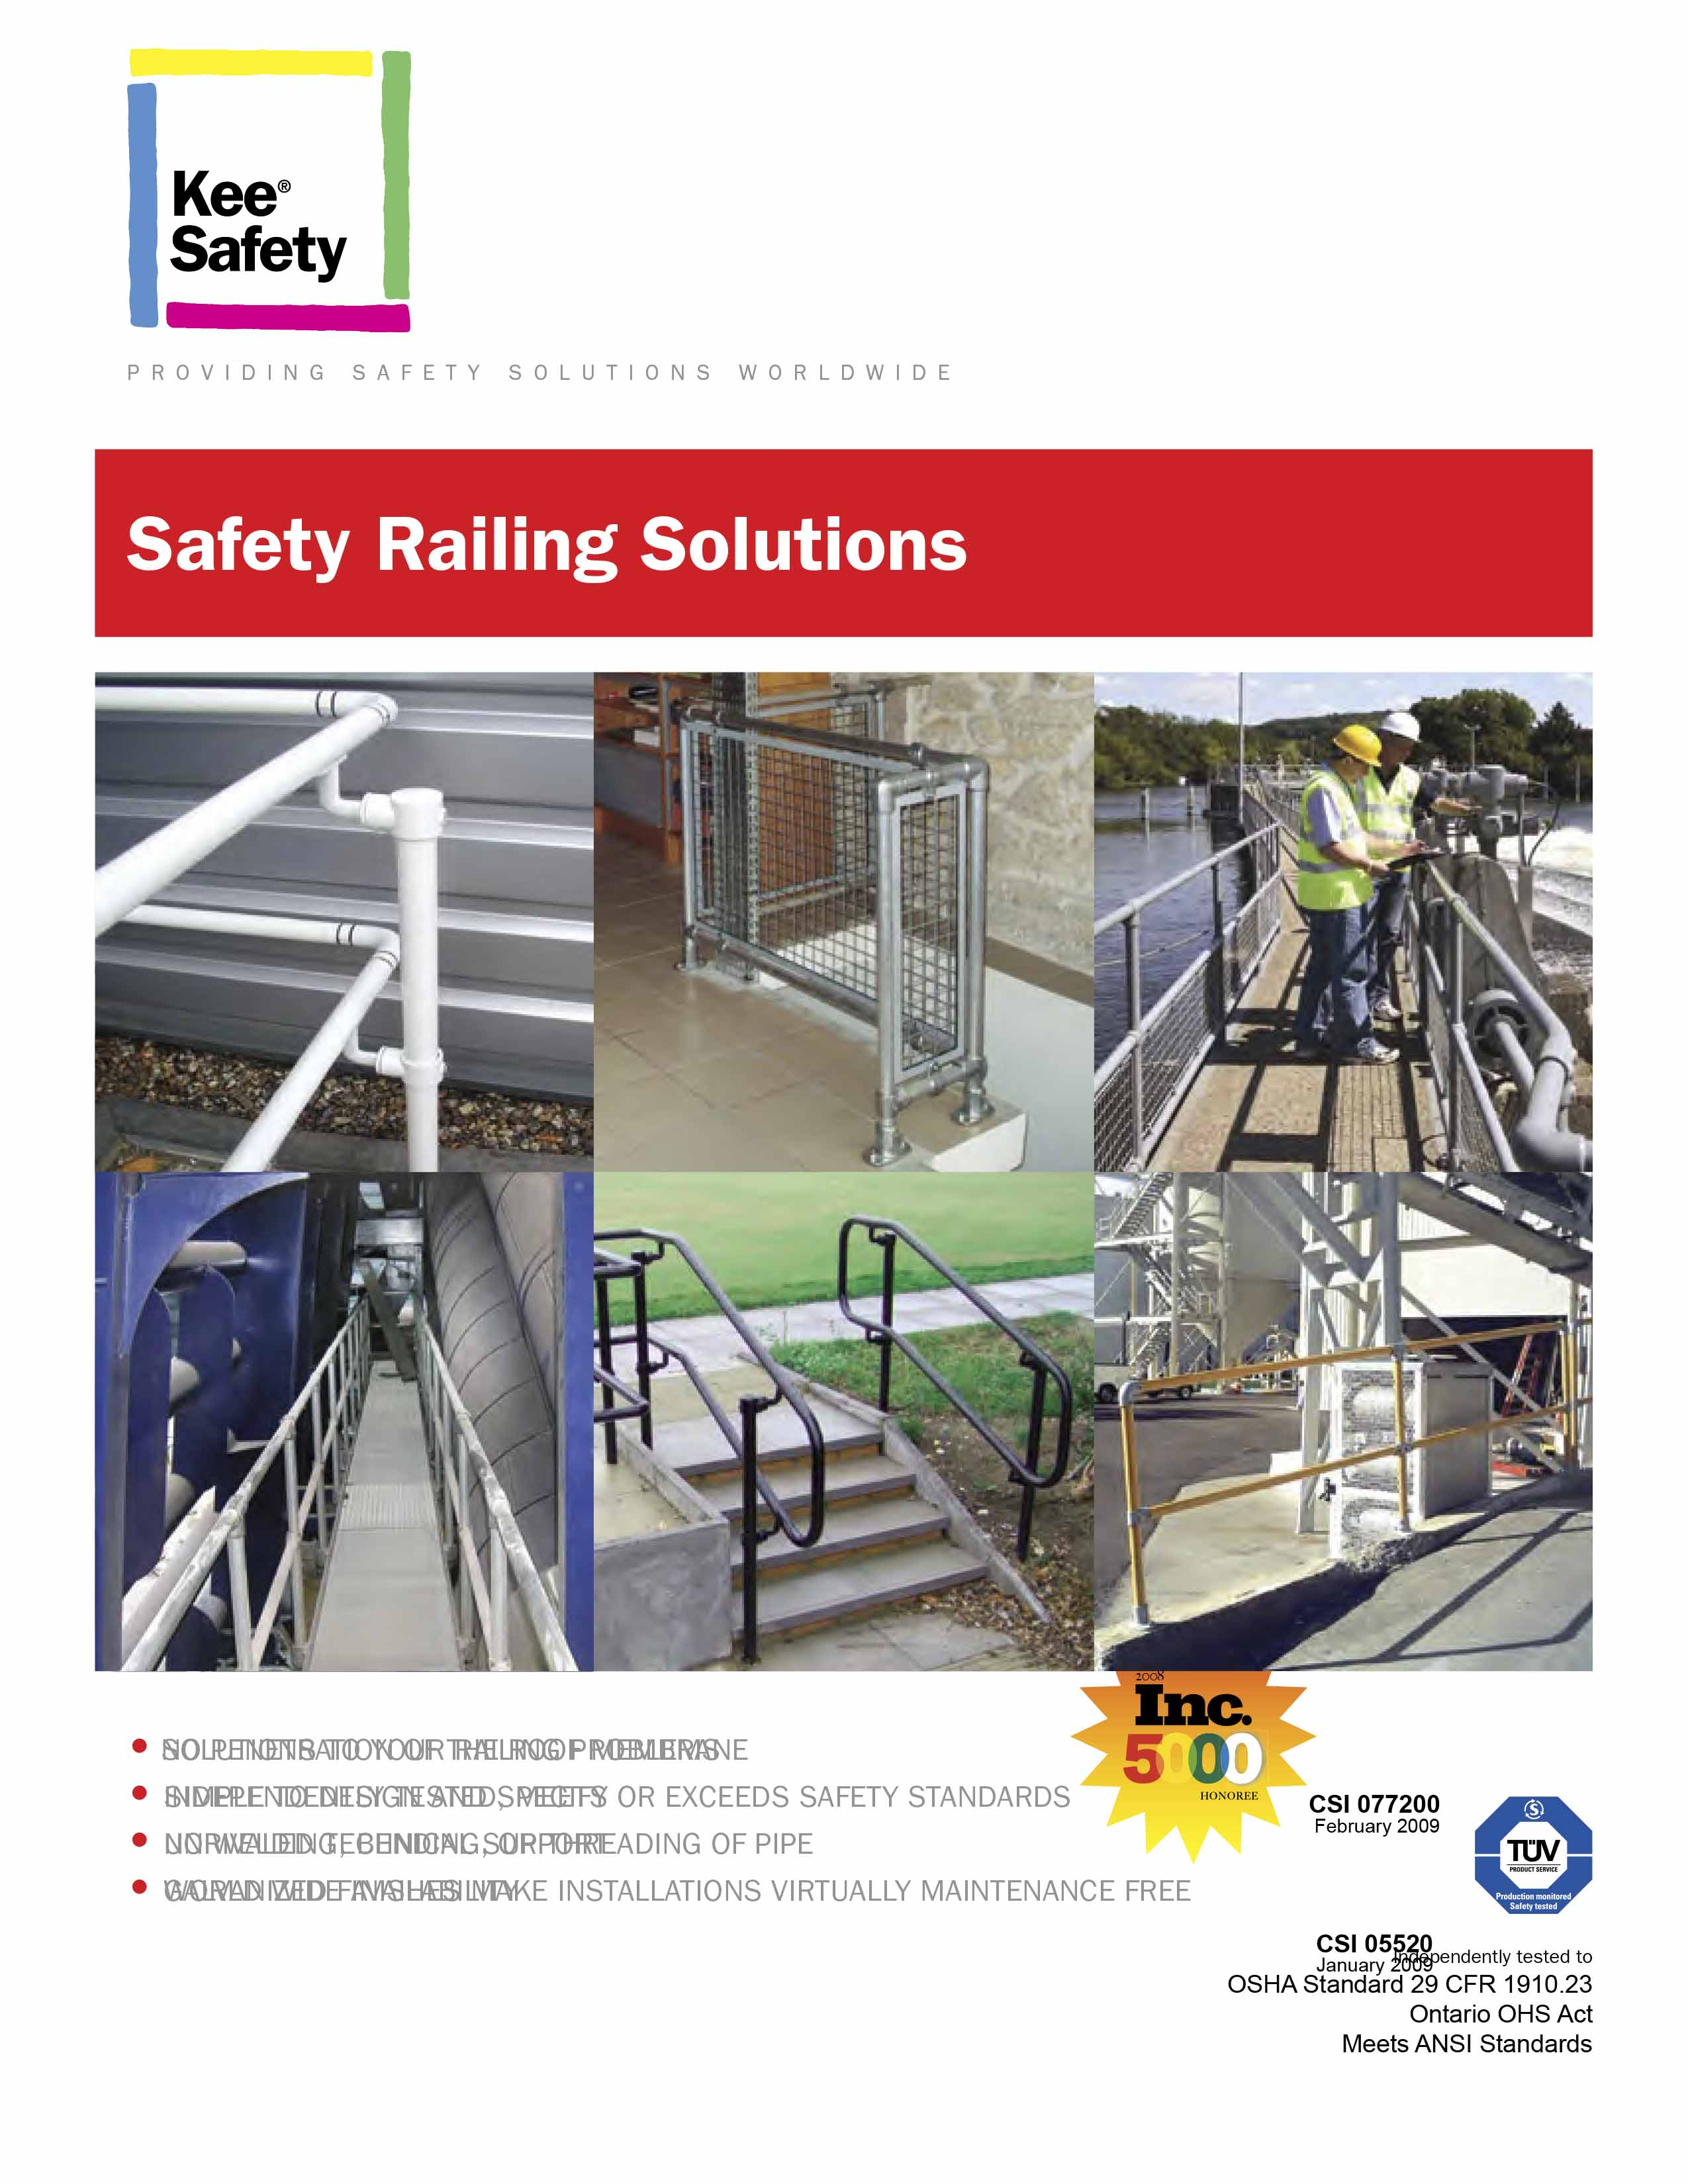 safety railing solutions catalog by Kee Safety